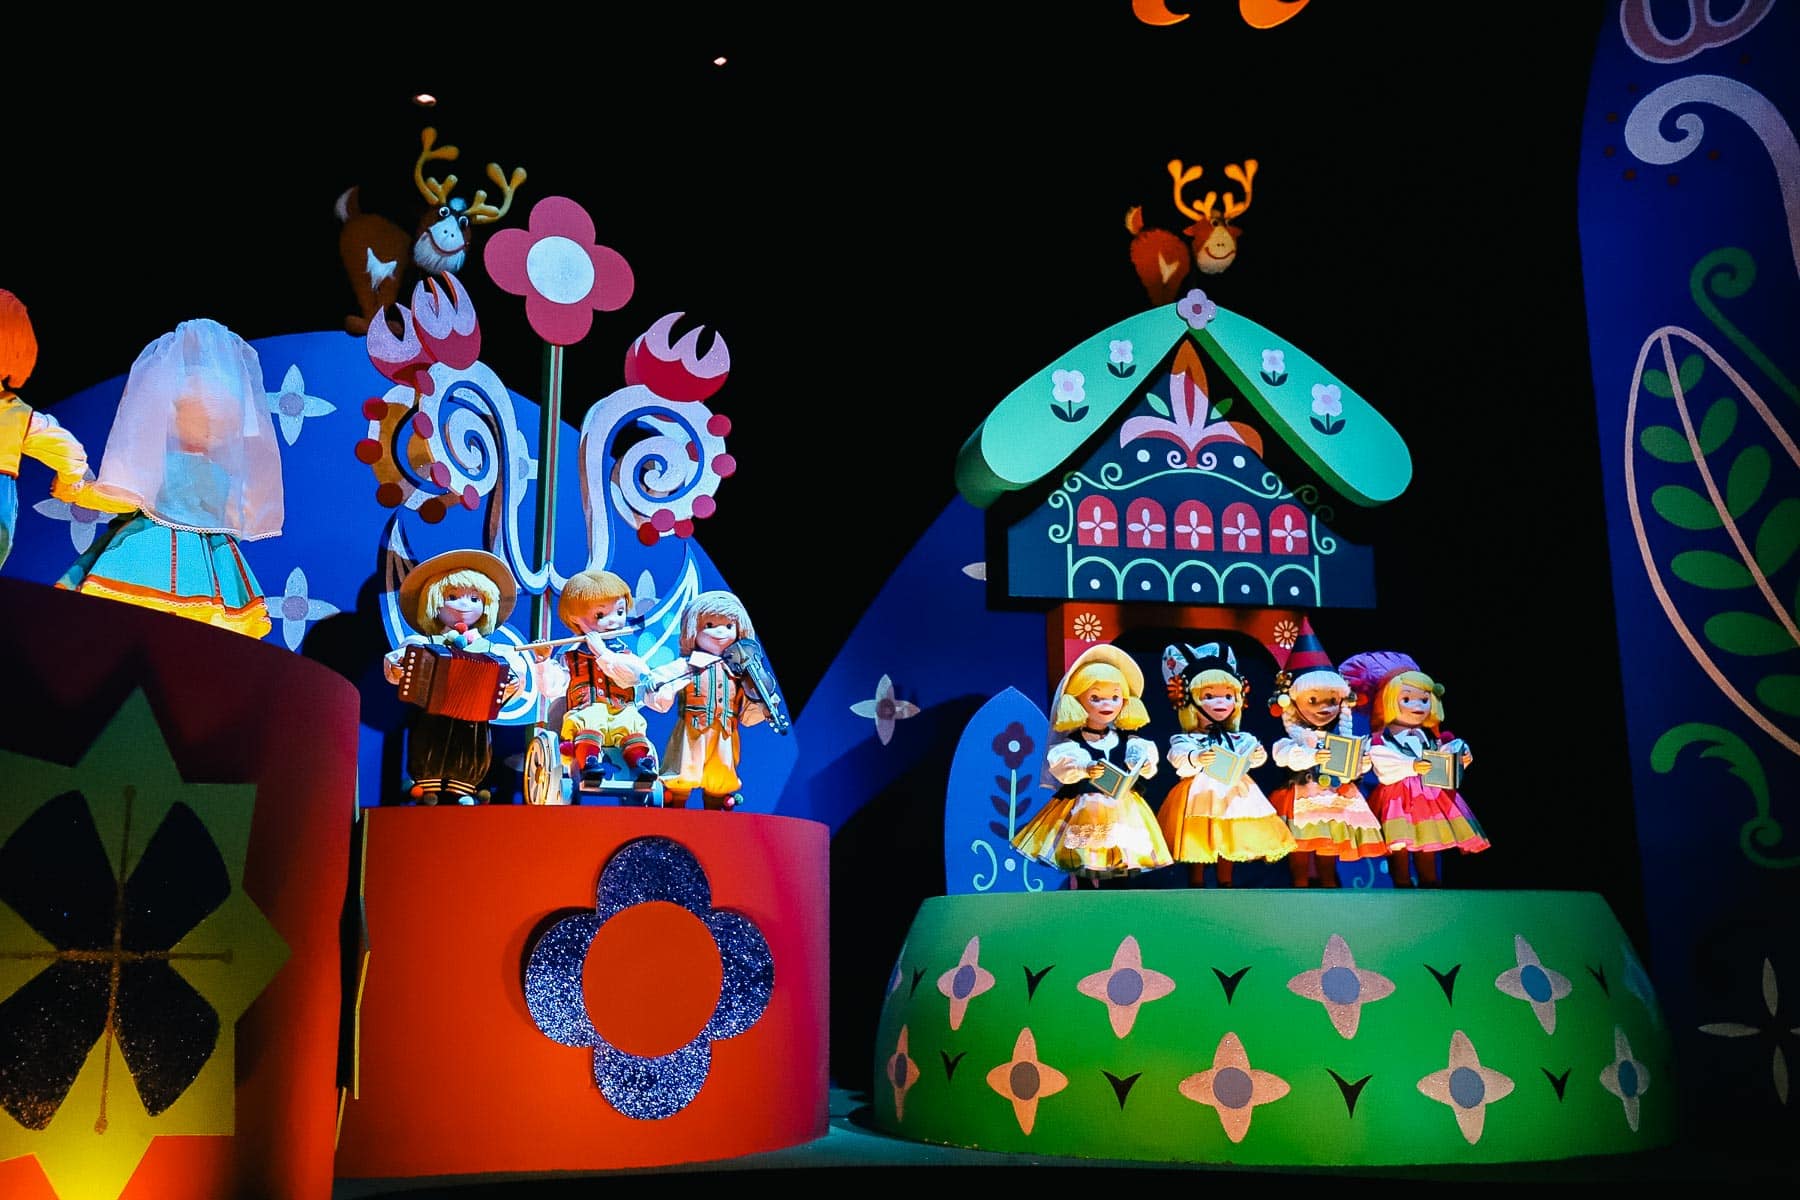 The first set of dolls at the ride's entrance include a new doll who's in a wheelchair. He is playing a flute. 